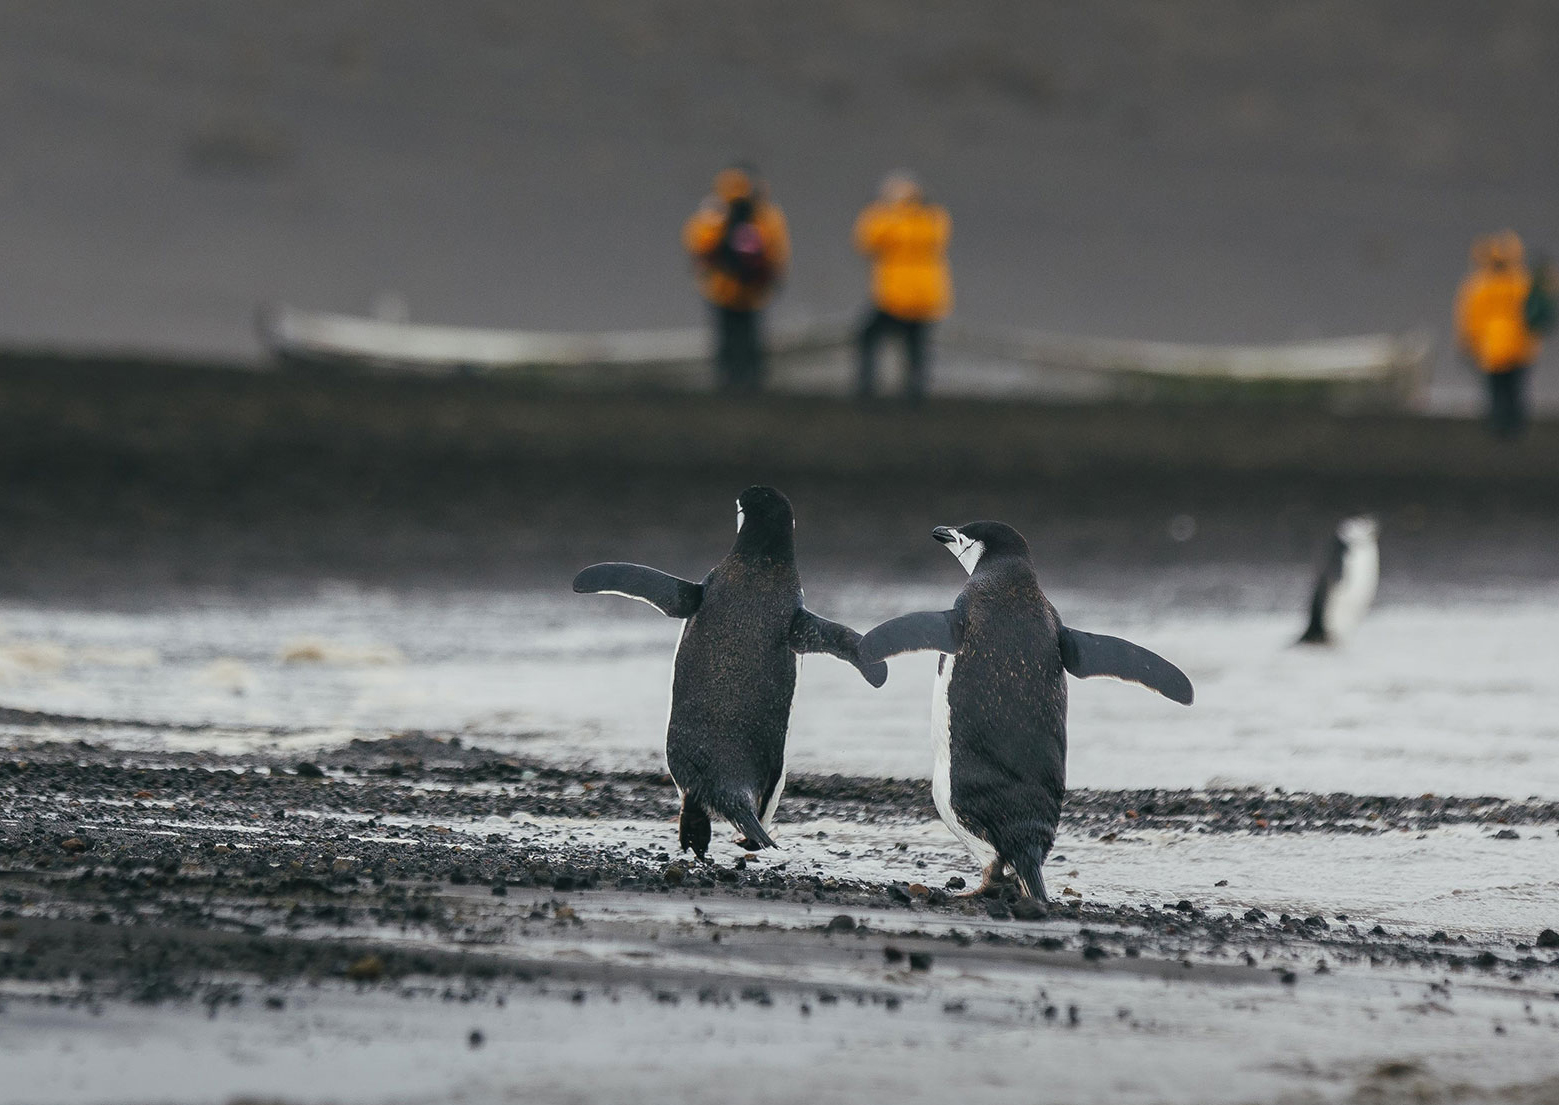 The curiosity between penguins and humans is mutual at Deception Island.